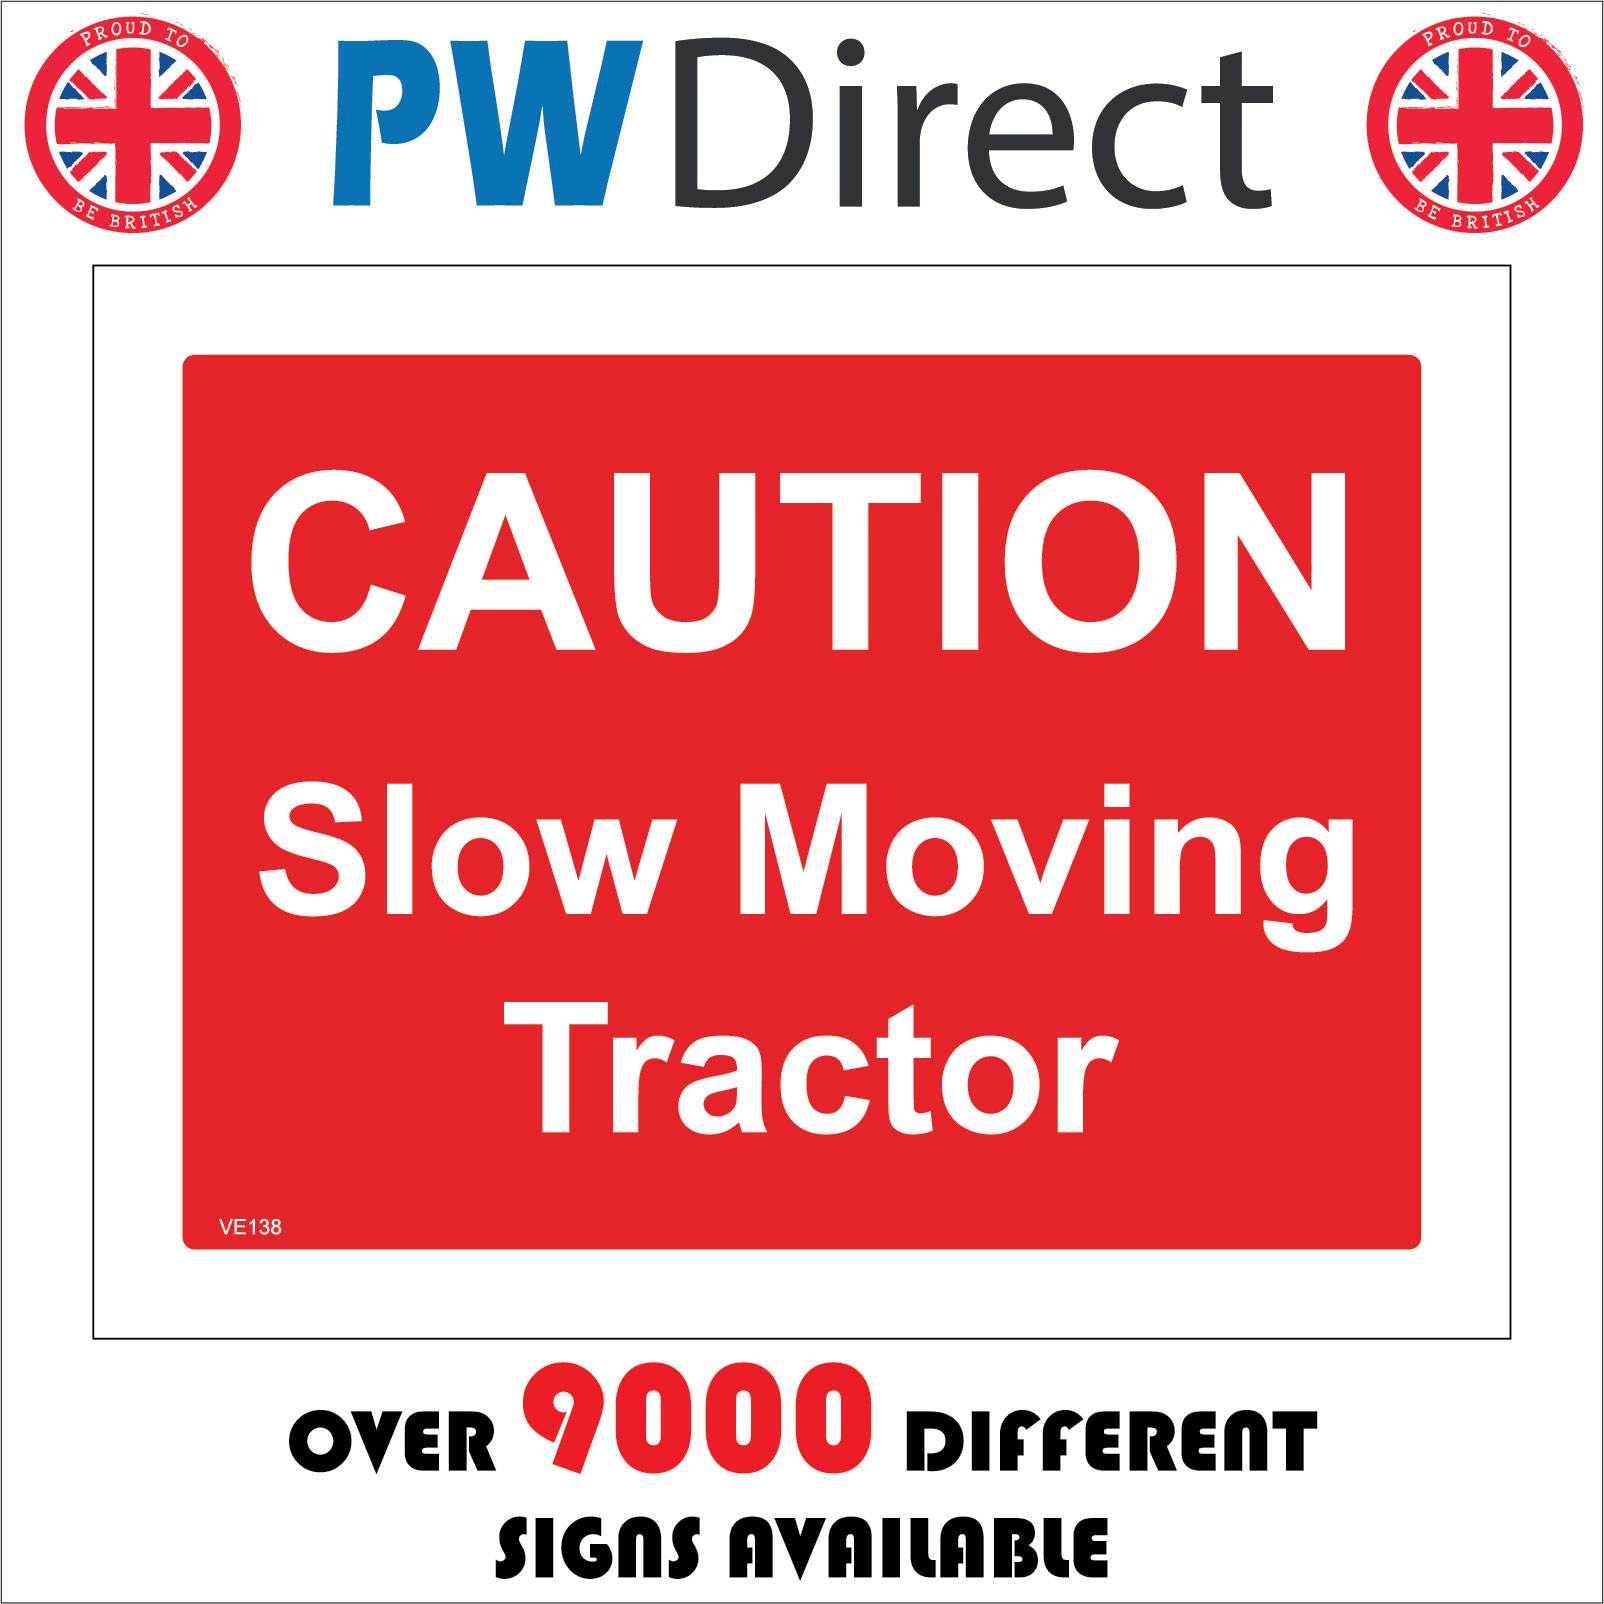 VE138 CAUTION SLOW MOVING TRACTOR SIGN AGRICULTURE FARMING COUNTRY SIDE FIELD